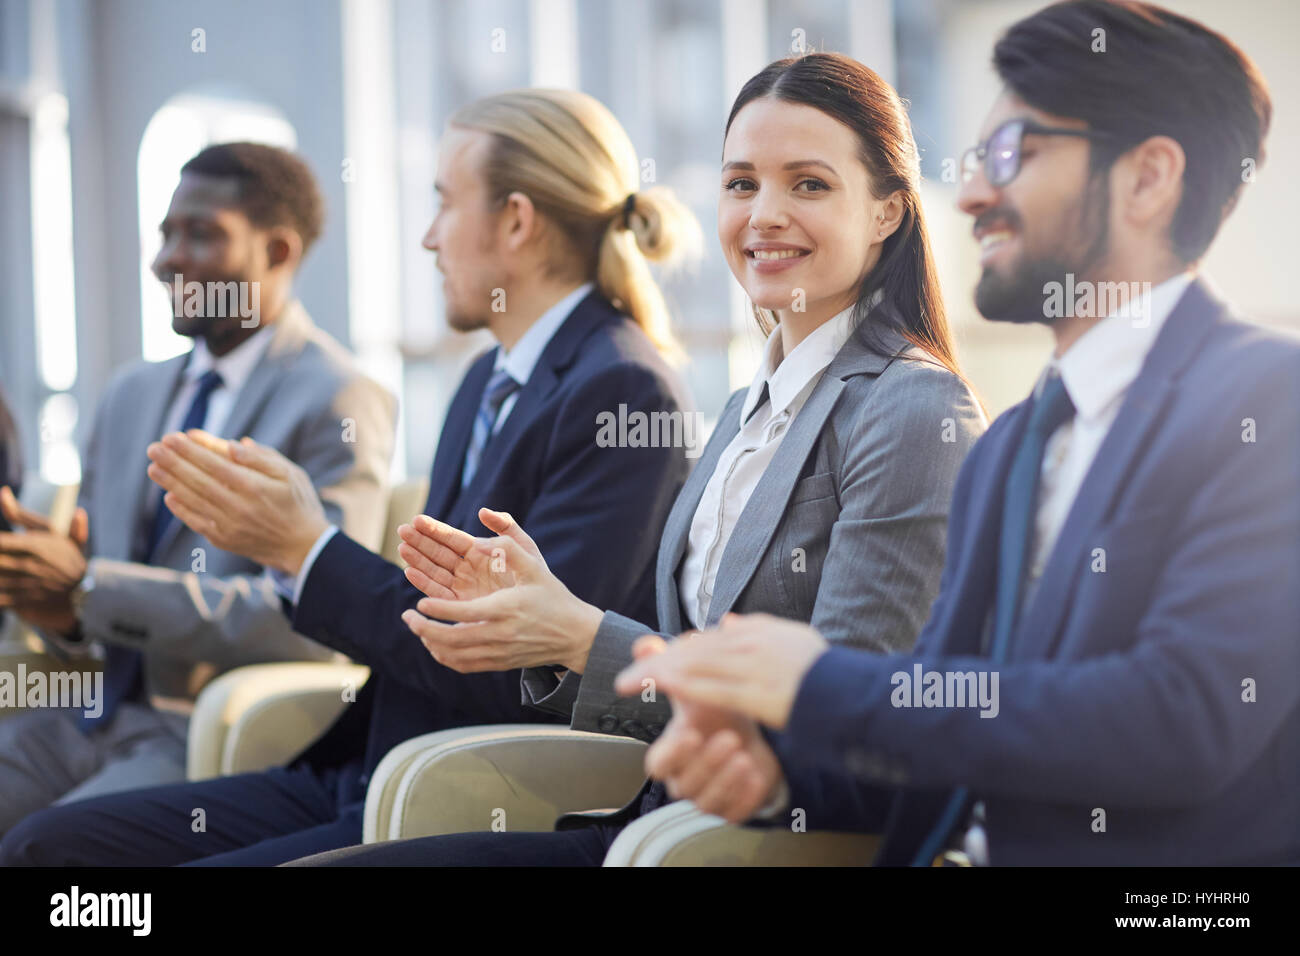 Clapping hands Stock Photo